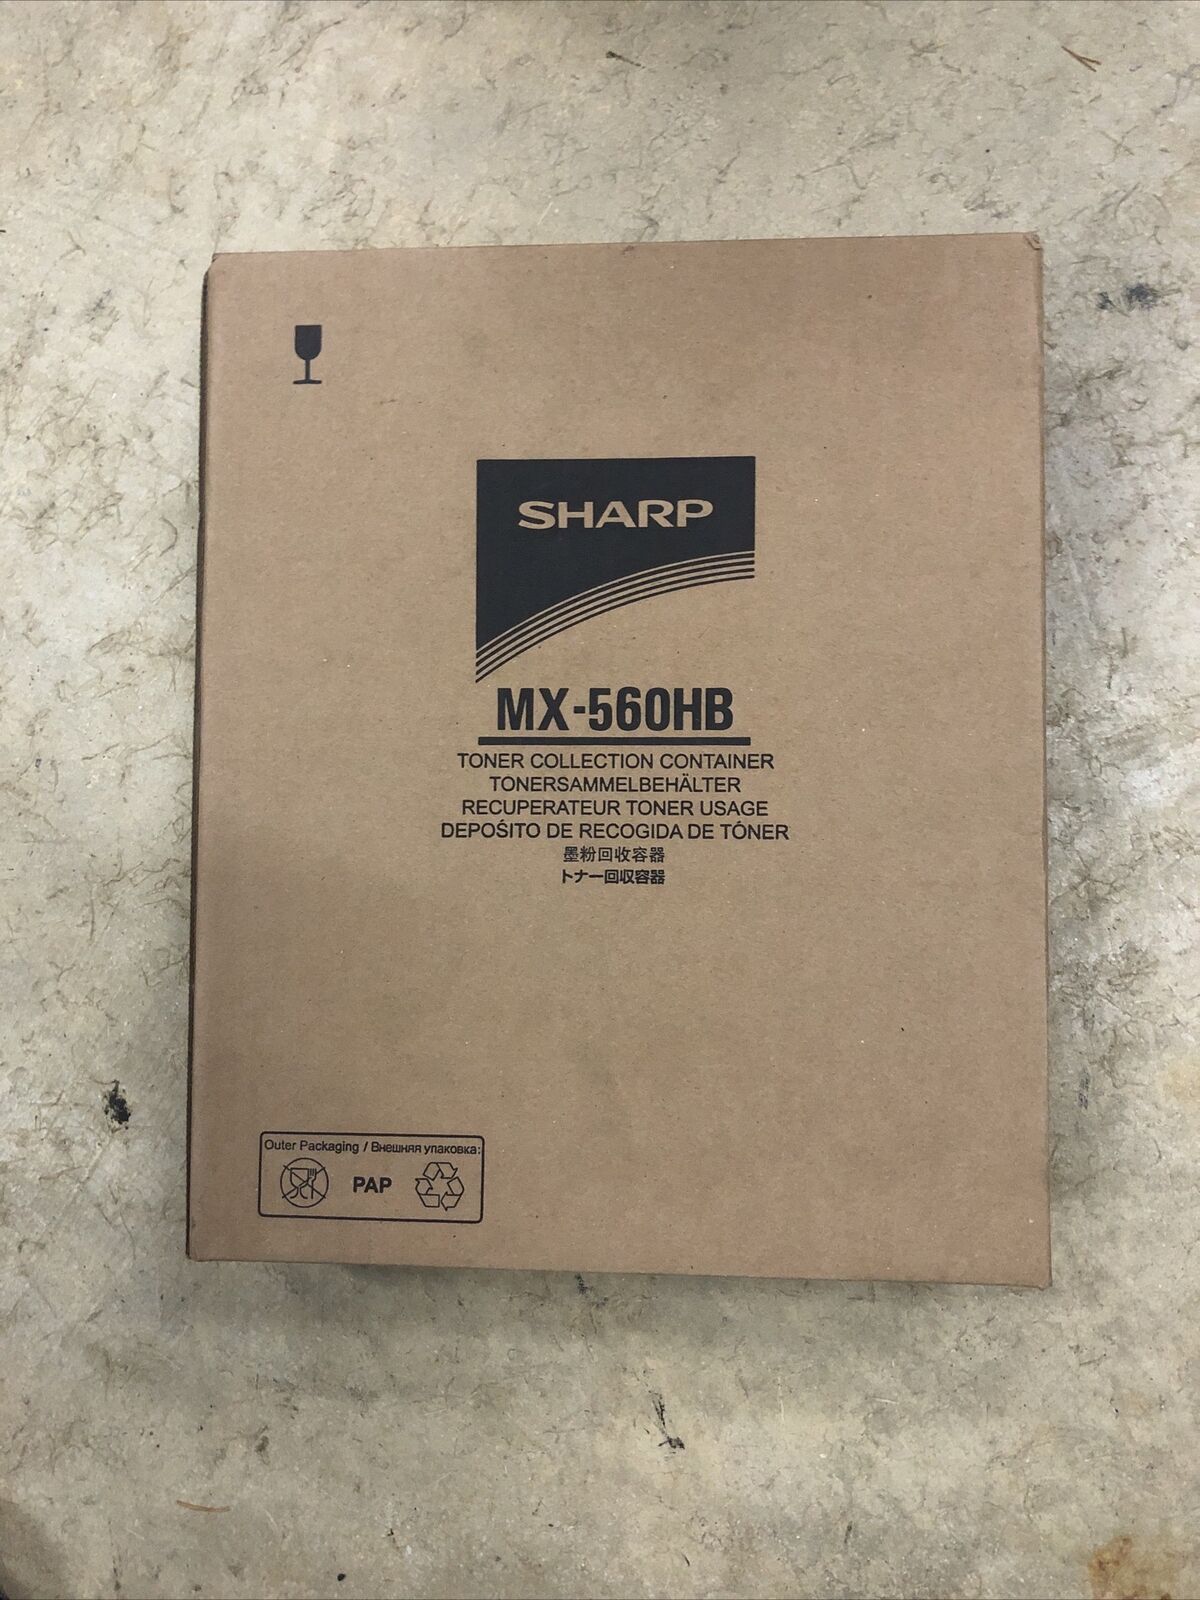 Sharp MX-560HB Waste Toner Collection Container New